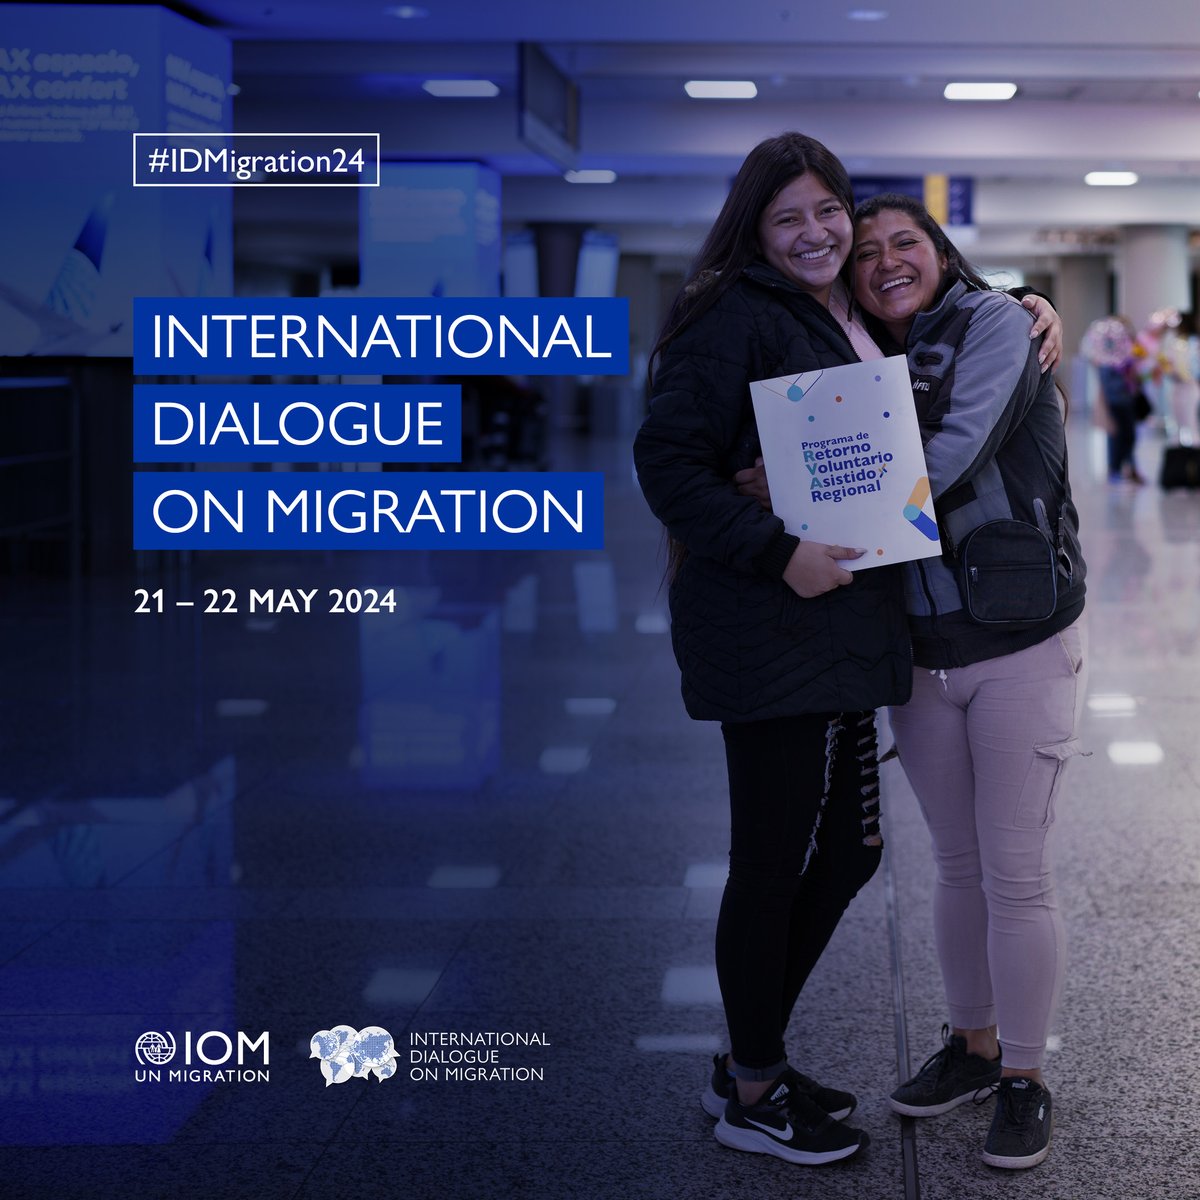 Migration is a solution to some of the world's most pressing challenges. #IDMigration24 highlights how facilitating regular pathways can lead to stronger and better communities. Learn more at iom.int/idm